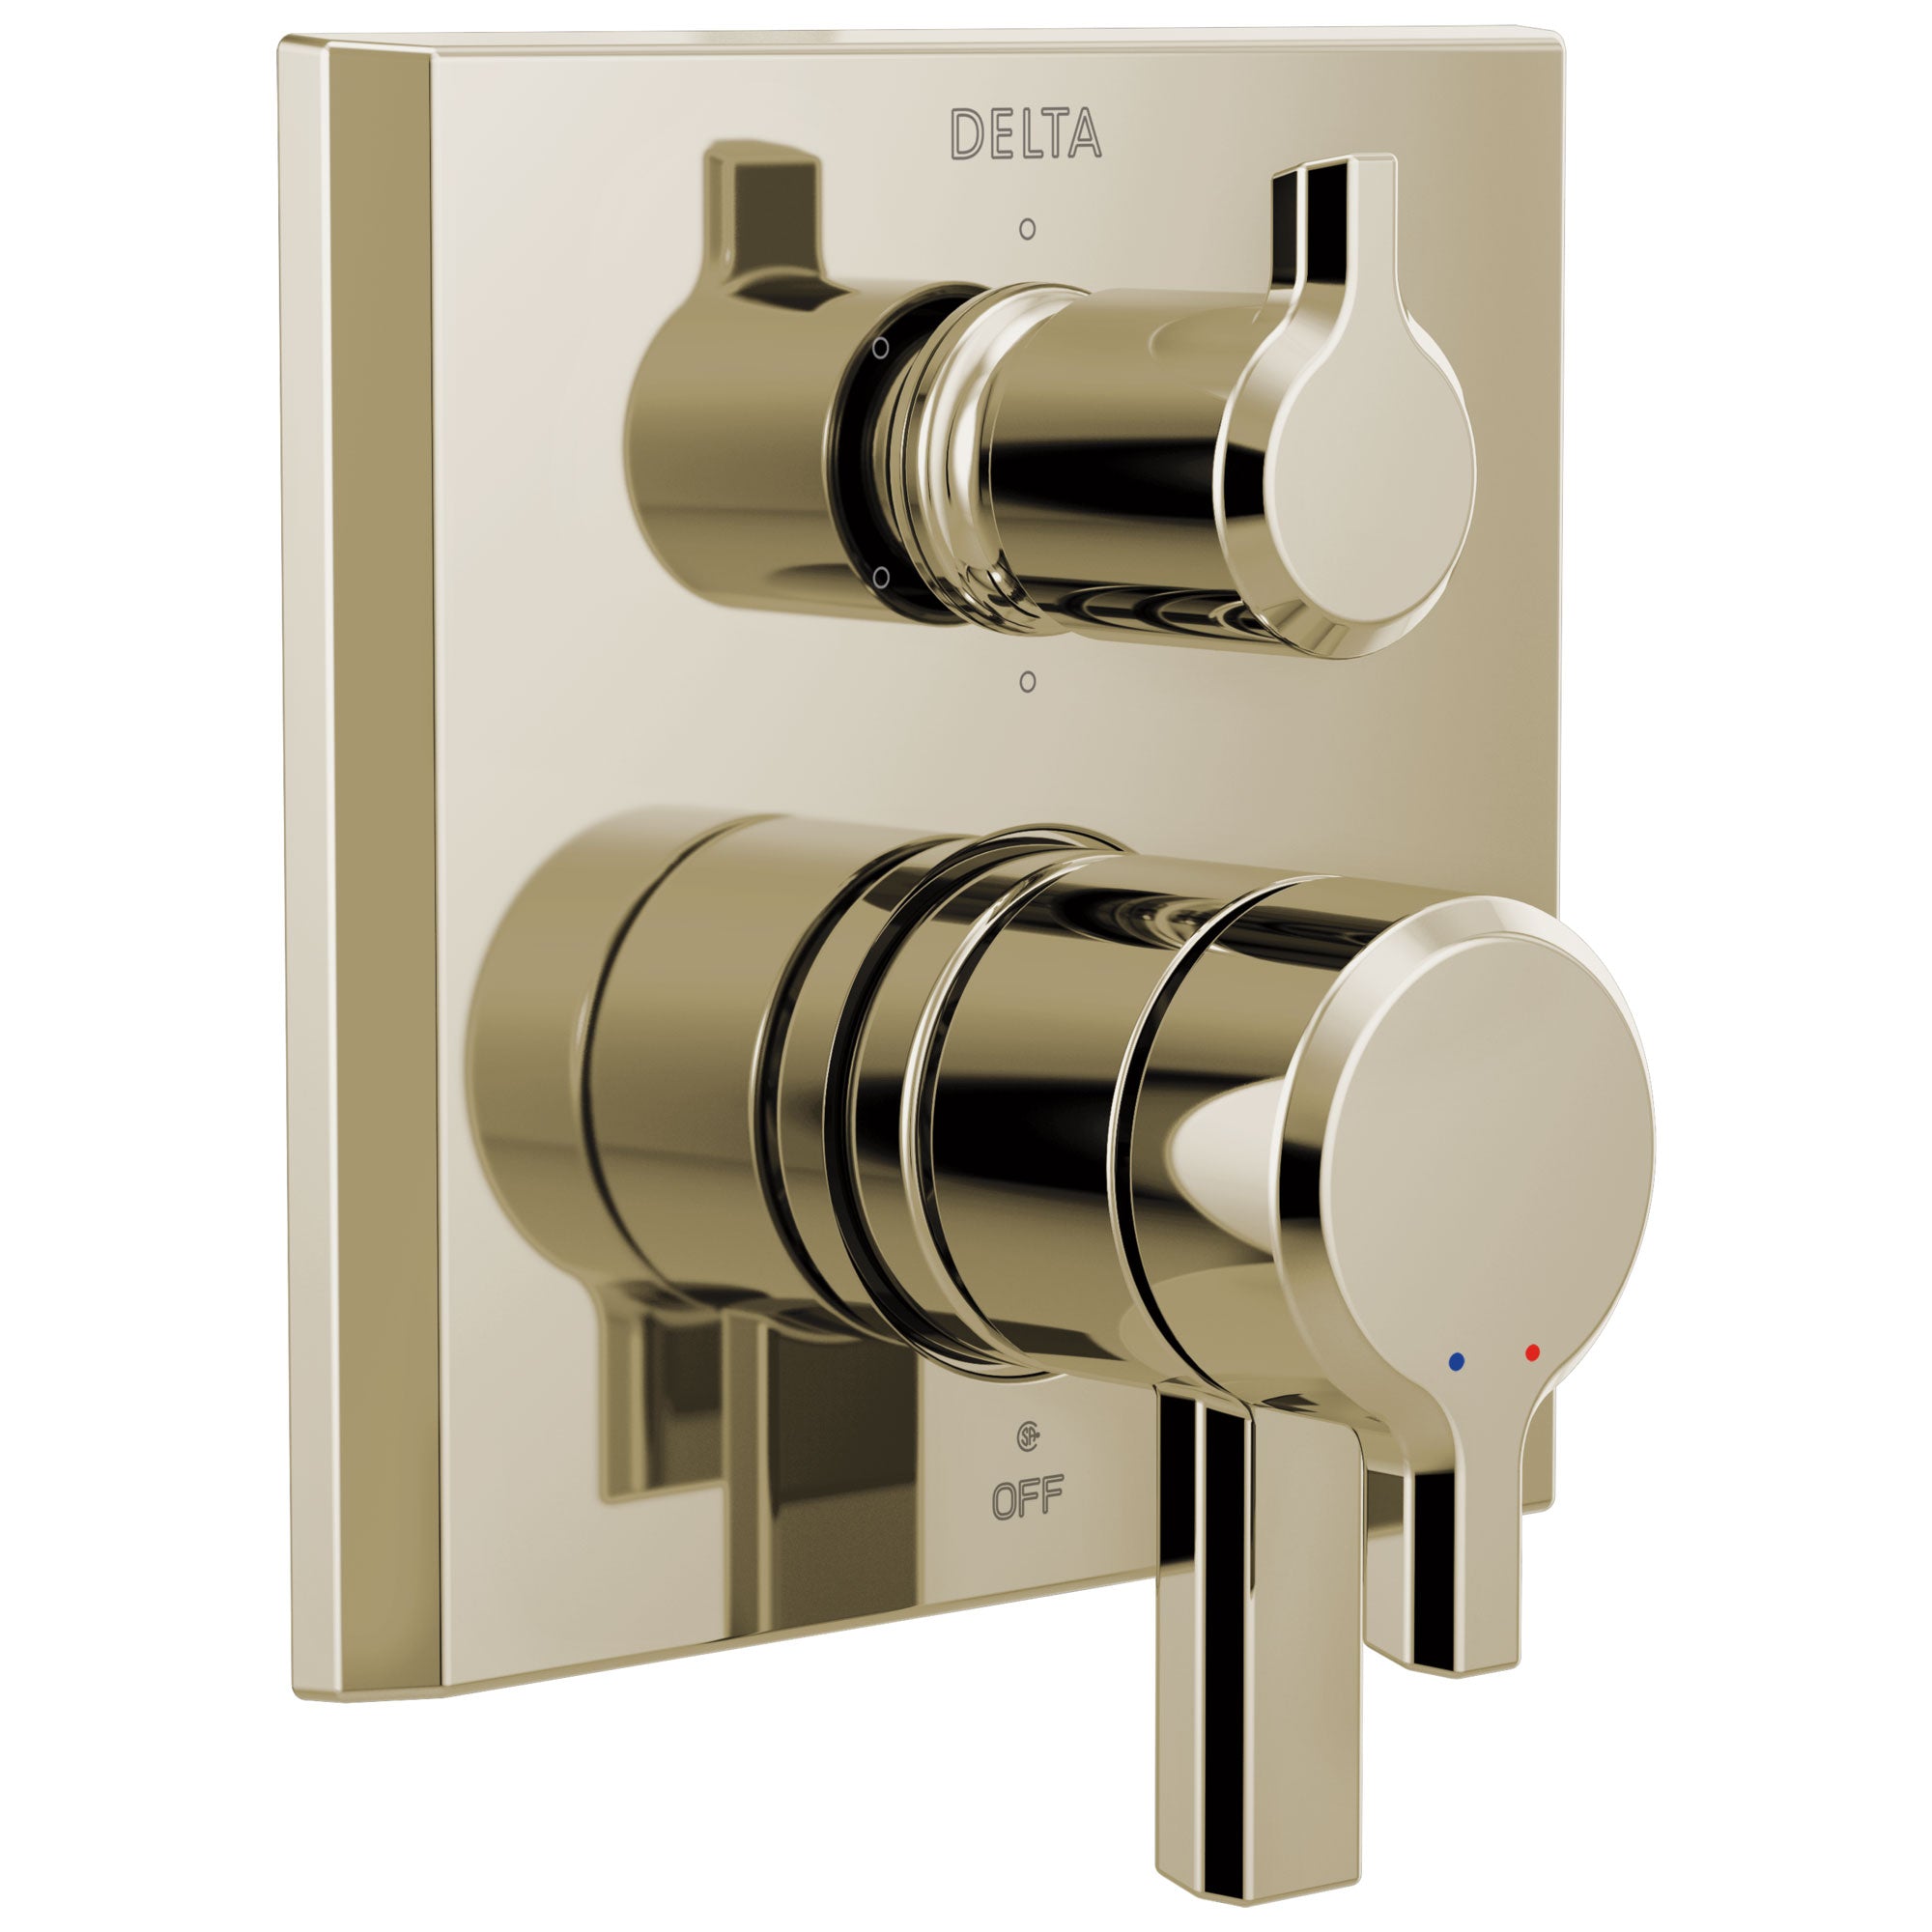 Delta Pivotal Polished Nickel Finish Monitor 17 Series Shower Control Trim Kit with 6-Setting Diverter (Requires Valve) DT27999PN